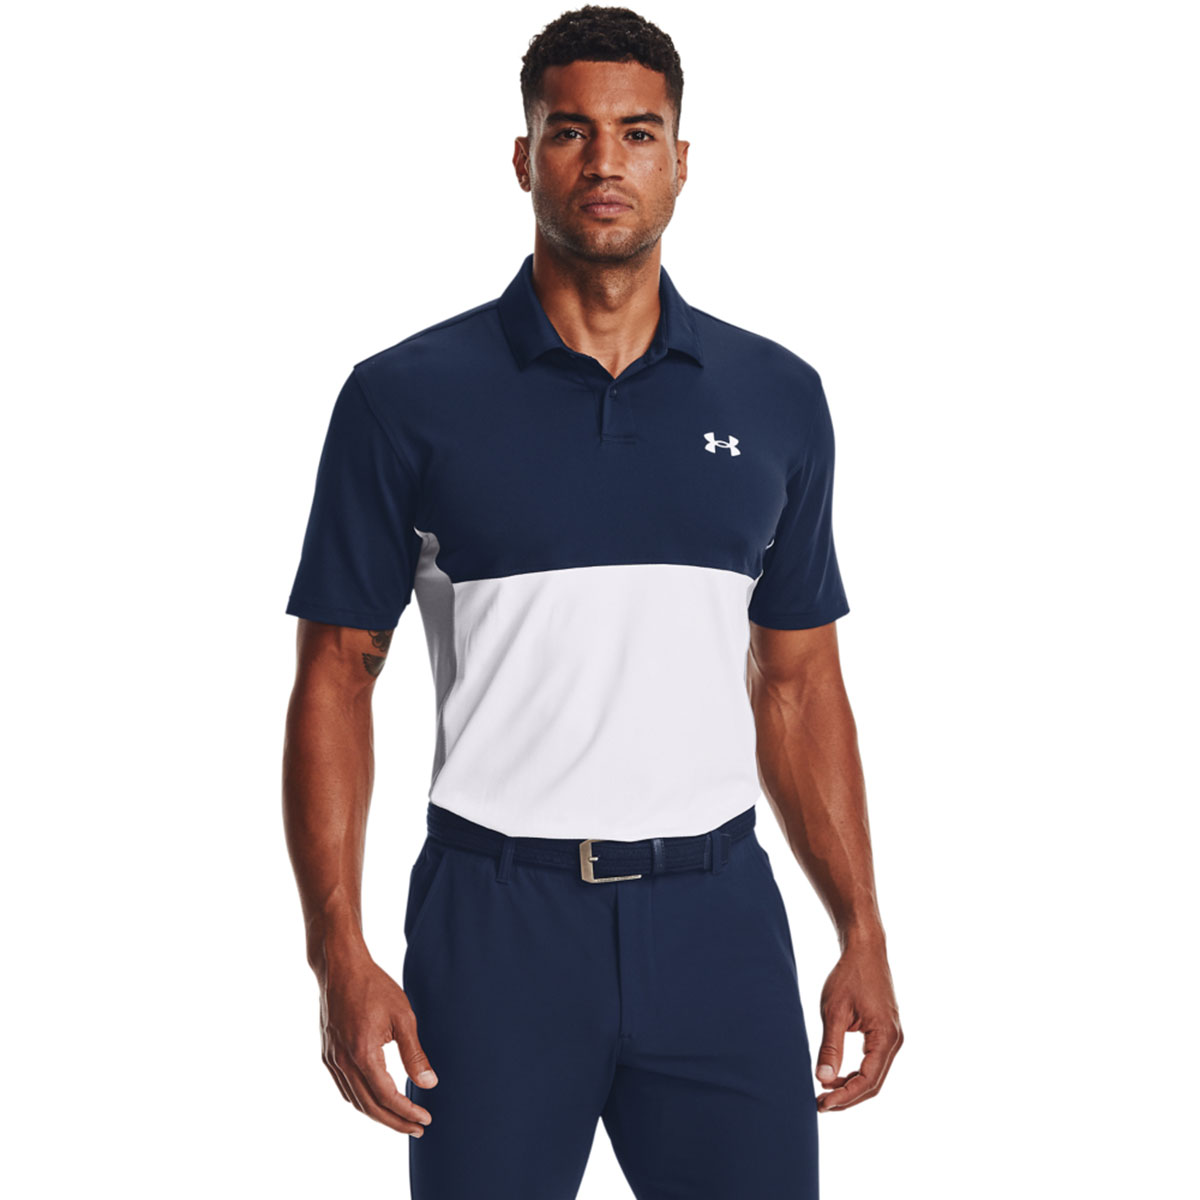 Under Armour Men's Performance Blocked Stretch Golf Polo from american